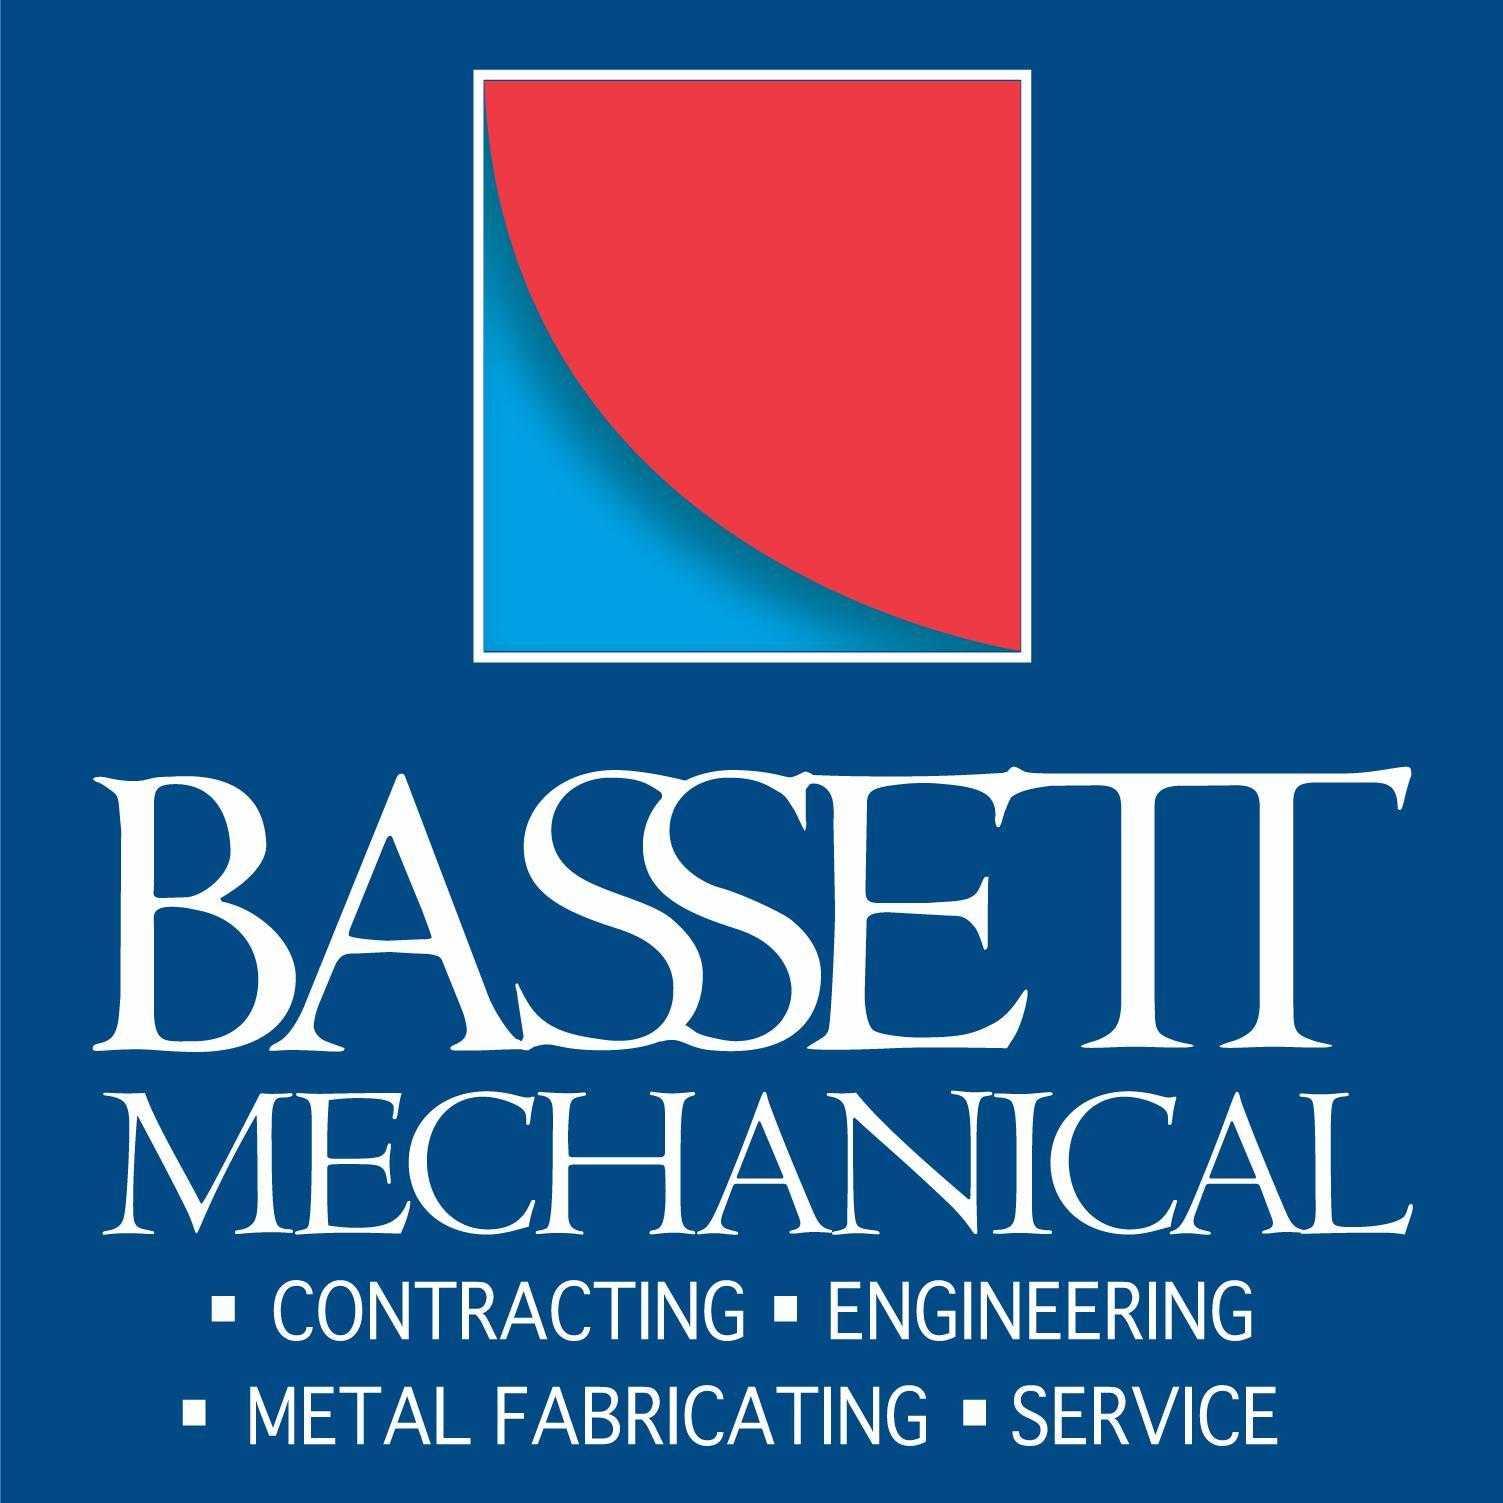 Bassett Mechanical is your single source for all of your industrial refrigeration, HVAC, plumbing, and maintenance service needs. Creating Customers for Life®